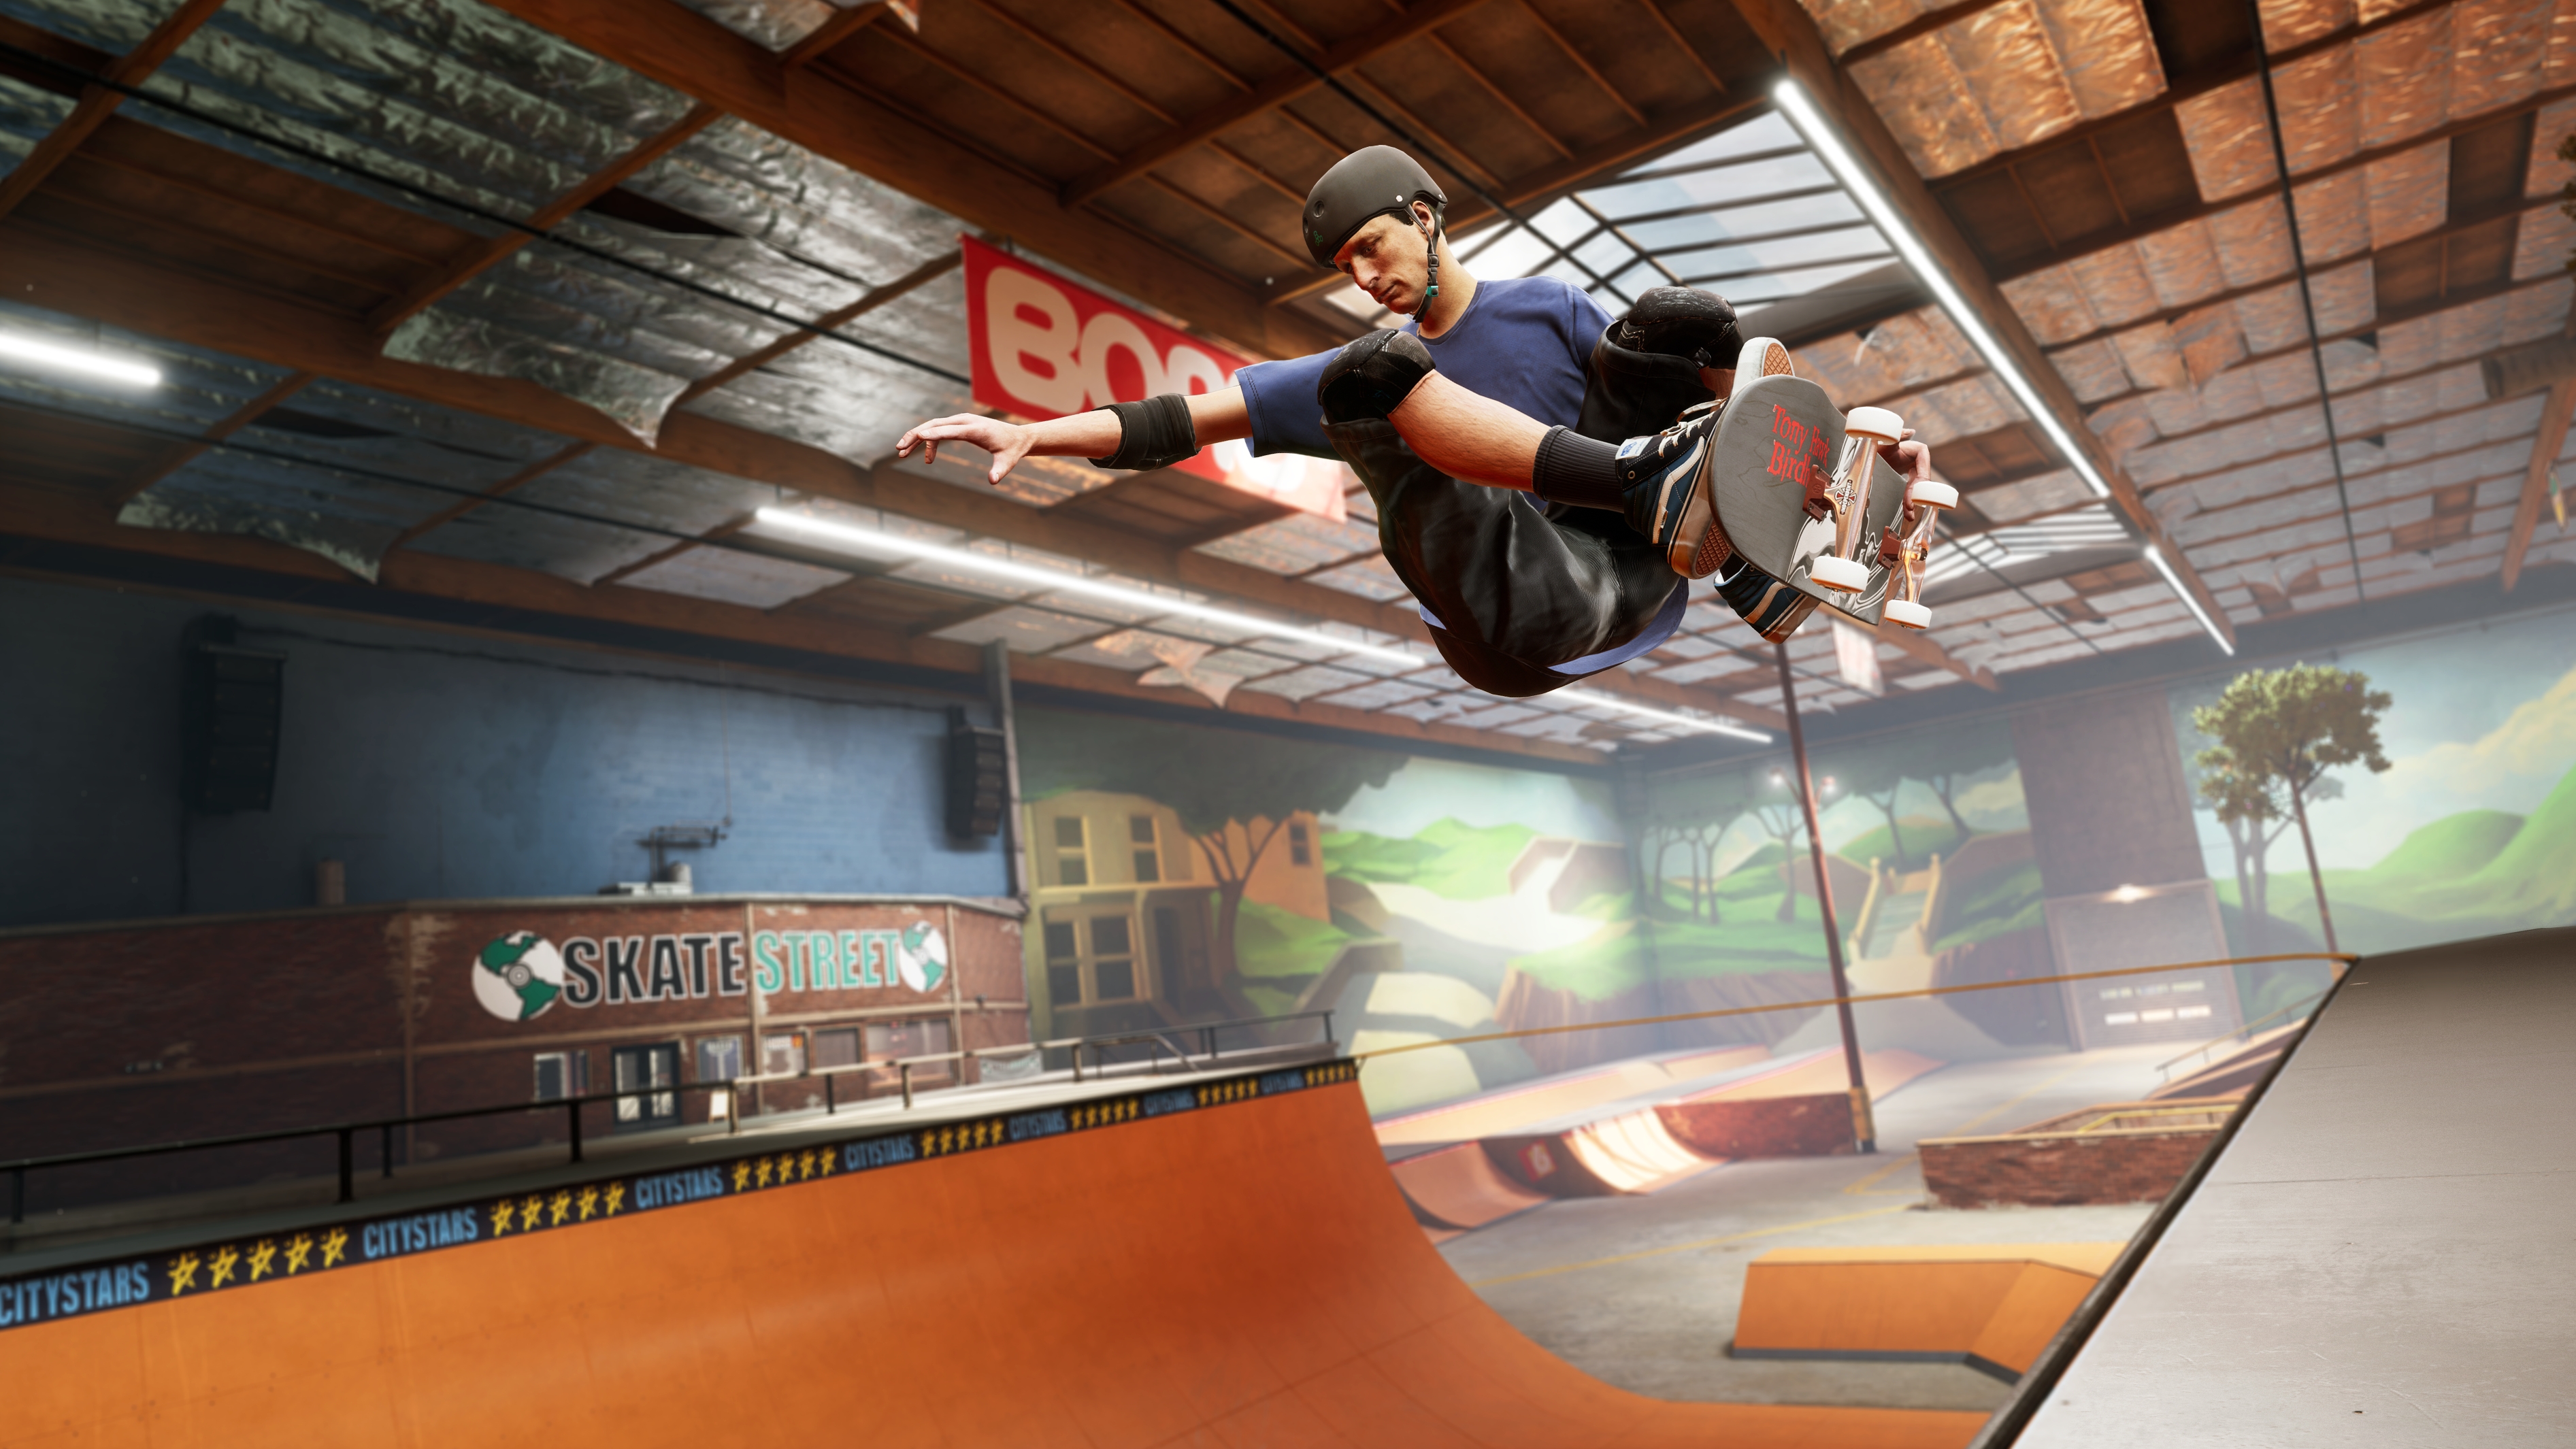 Tony Hawk's™ Pro Skater™ 1 and 2 - Official Trailer 